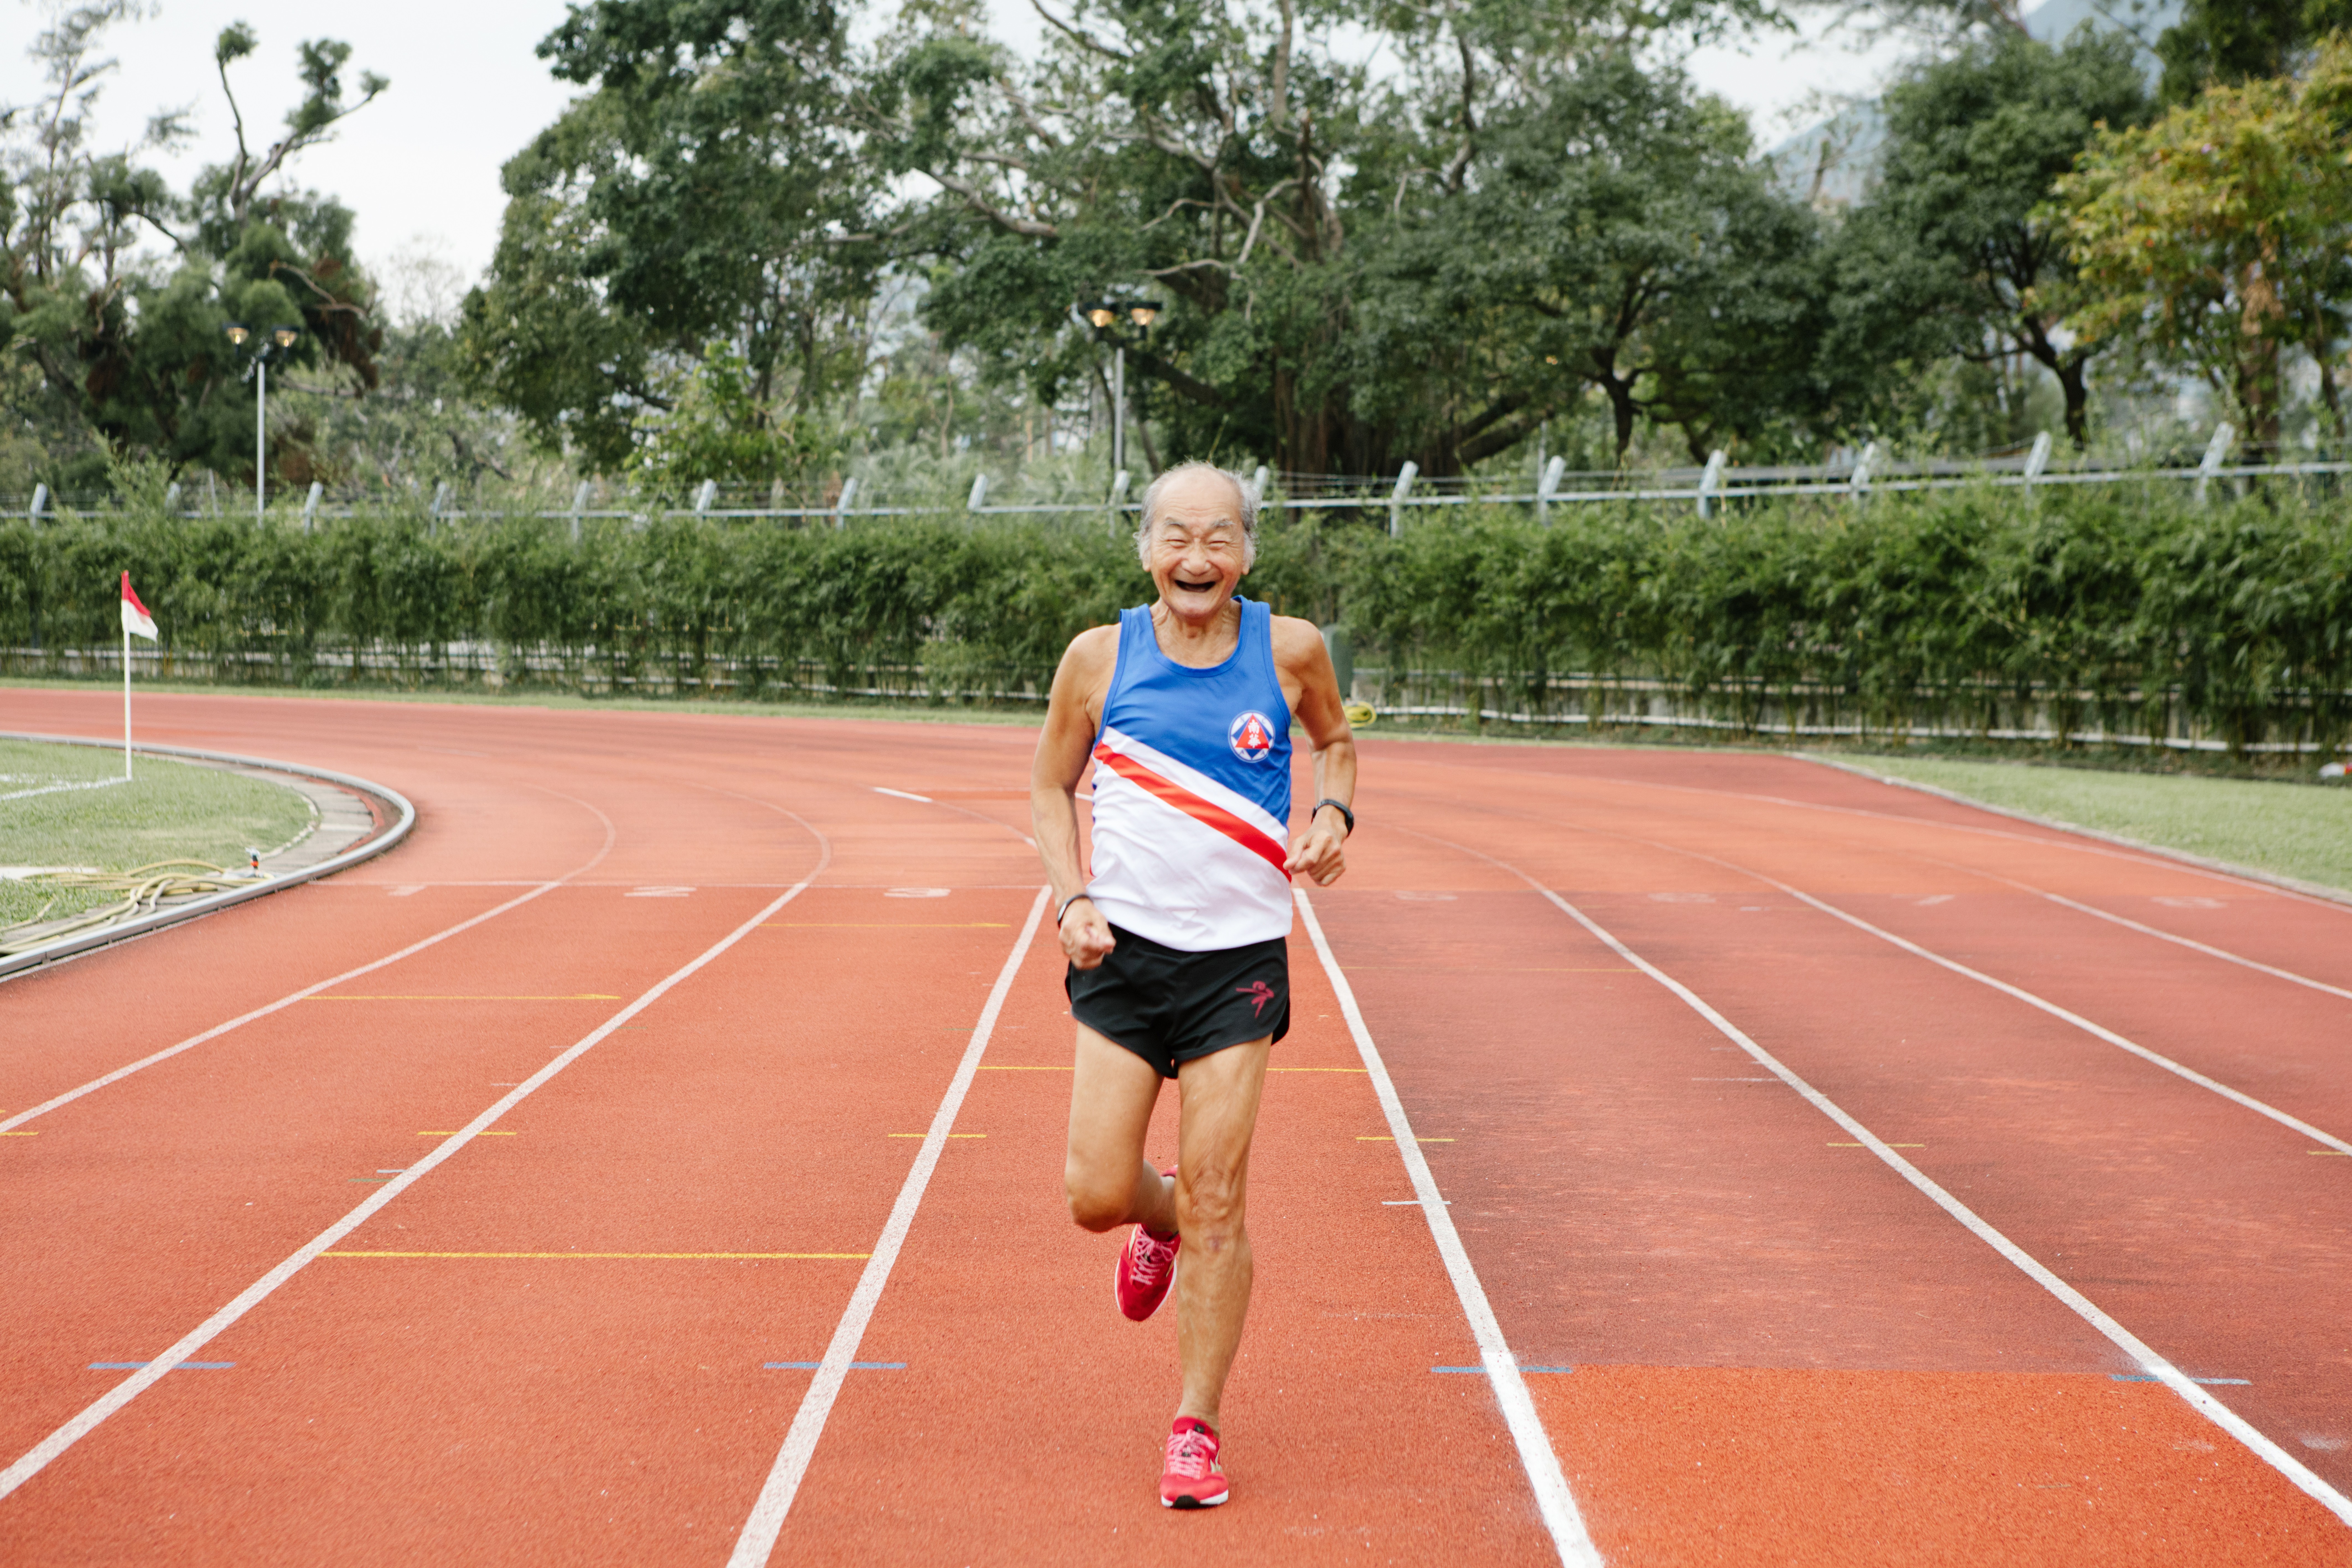 Retired Hong Kong minibus driver Chau Wai-chuen, 81, who has been a long-distance runner for almost 40 years, has taken part in six running events at this year’s Hong Kong Masters Athletics Championships. Photo: Deon Wong